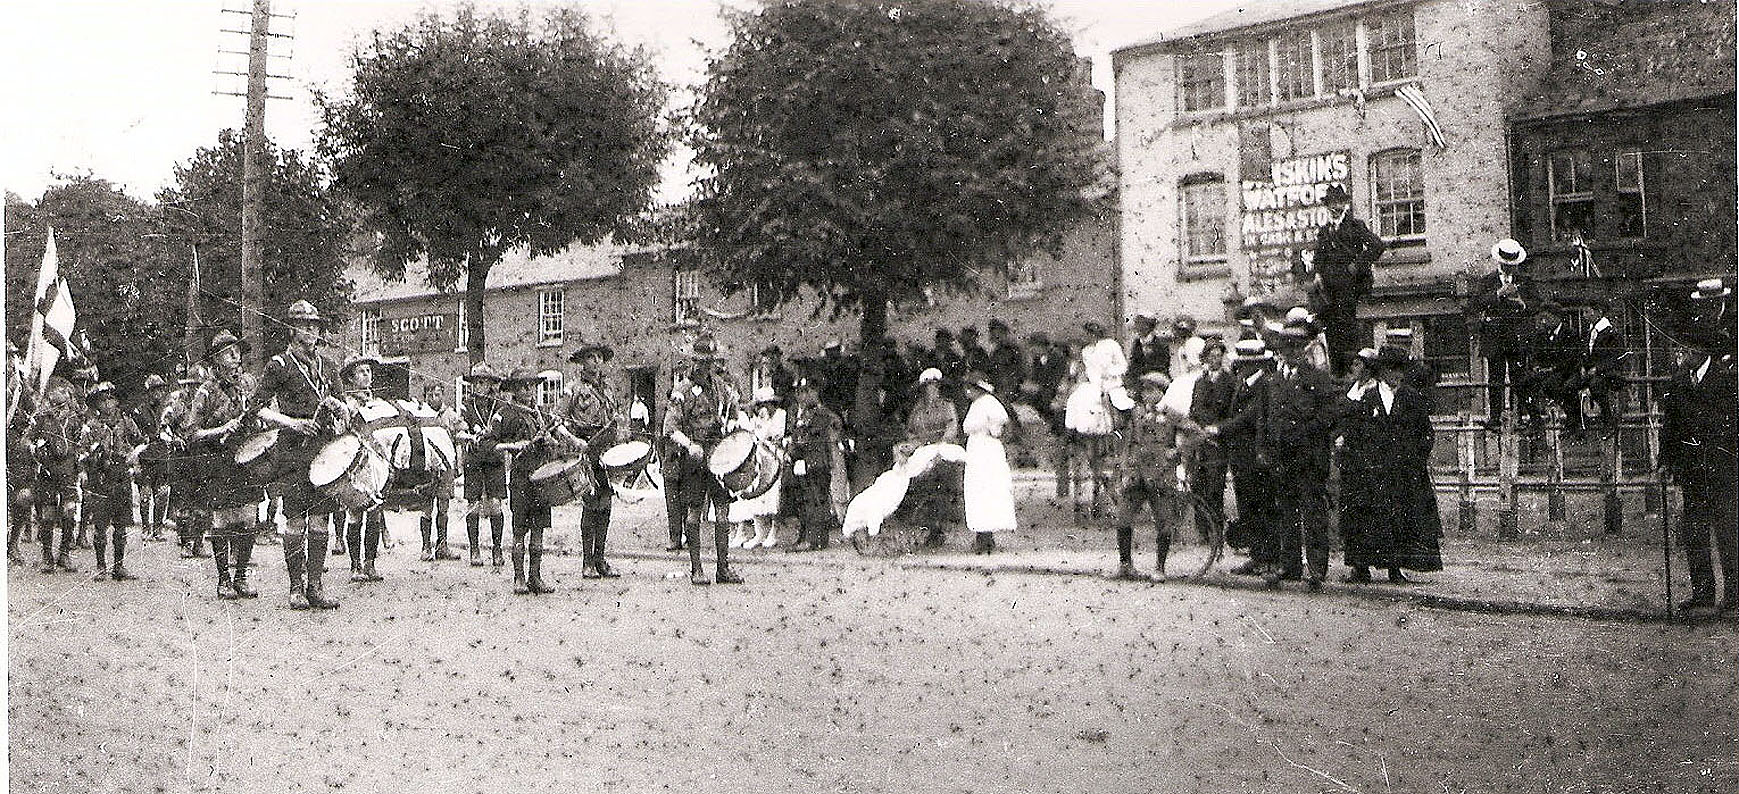 A photo much degraded showing a few people milling about in the square looking in direction of the camera.